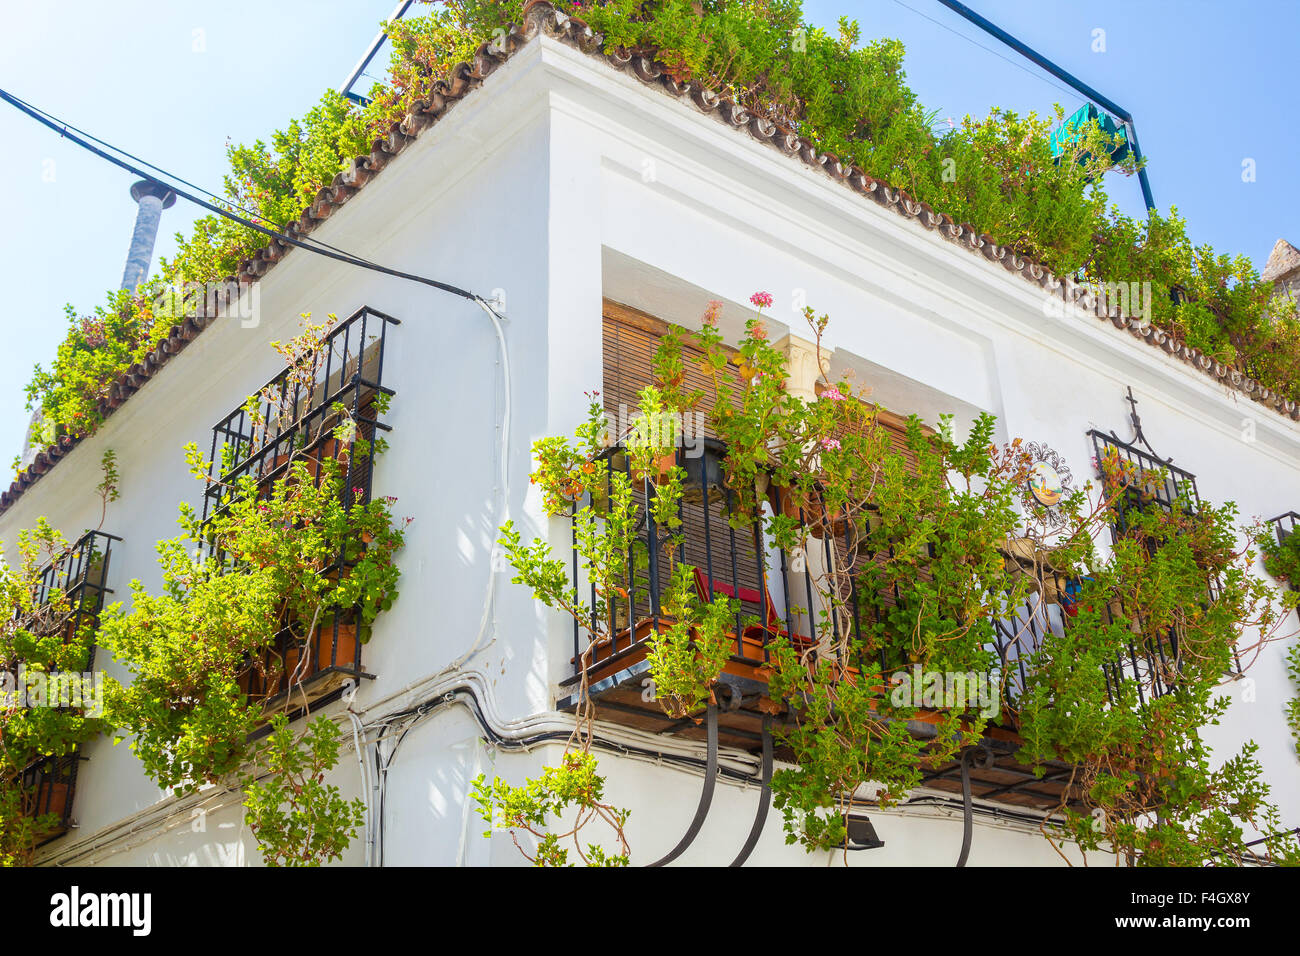 Typical windows with grilles and decorative flowers in the city of Cordoba, Spain Stock Photo